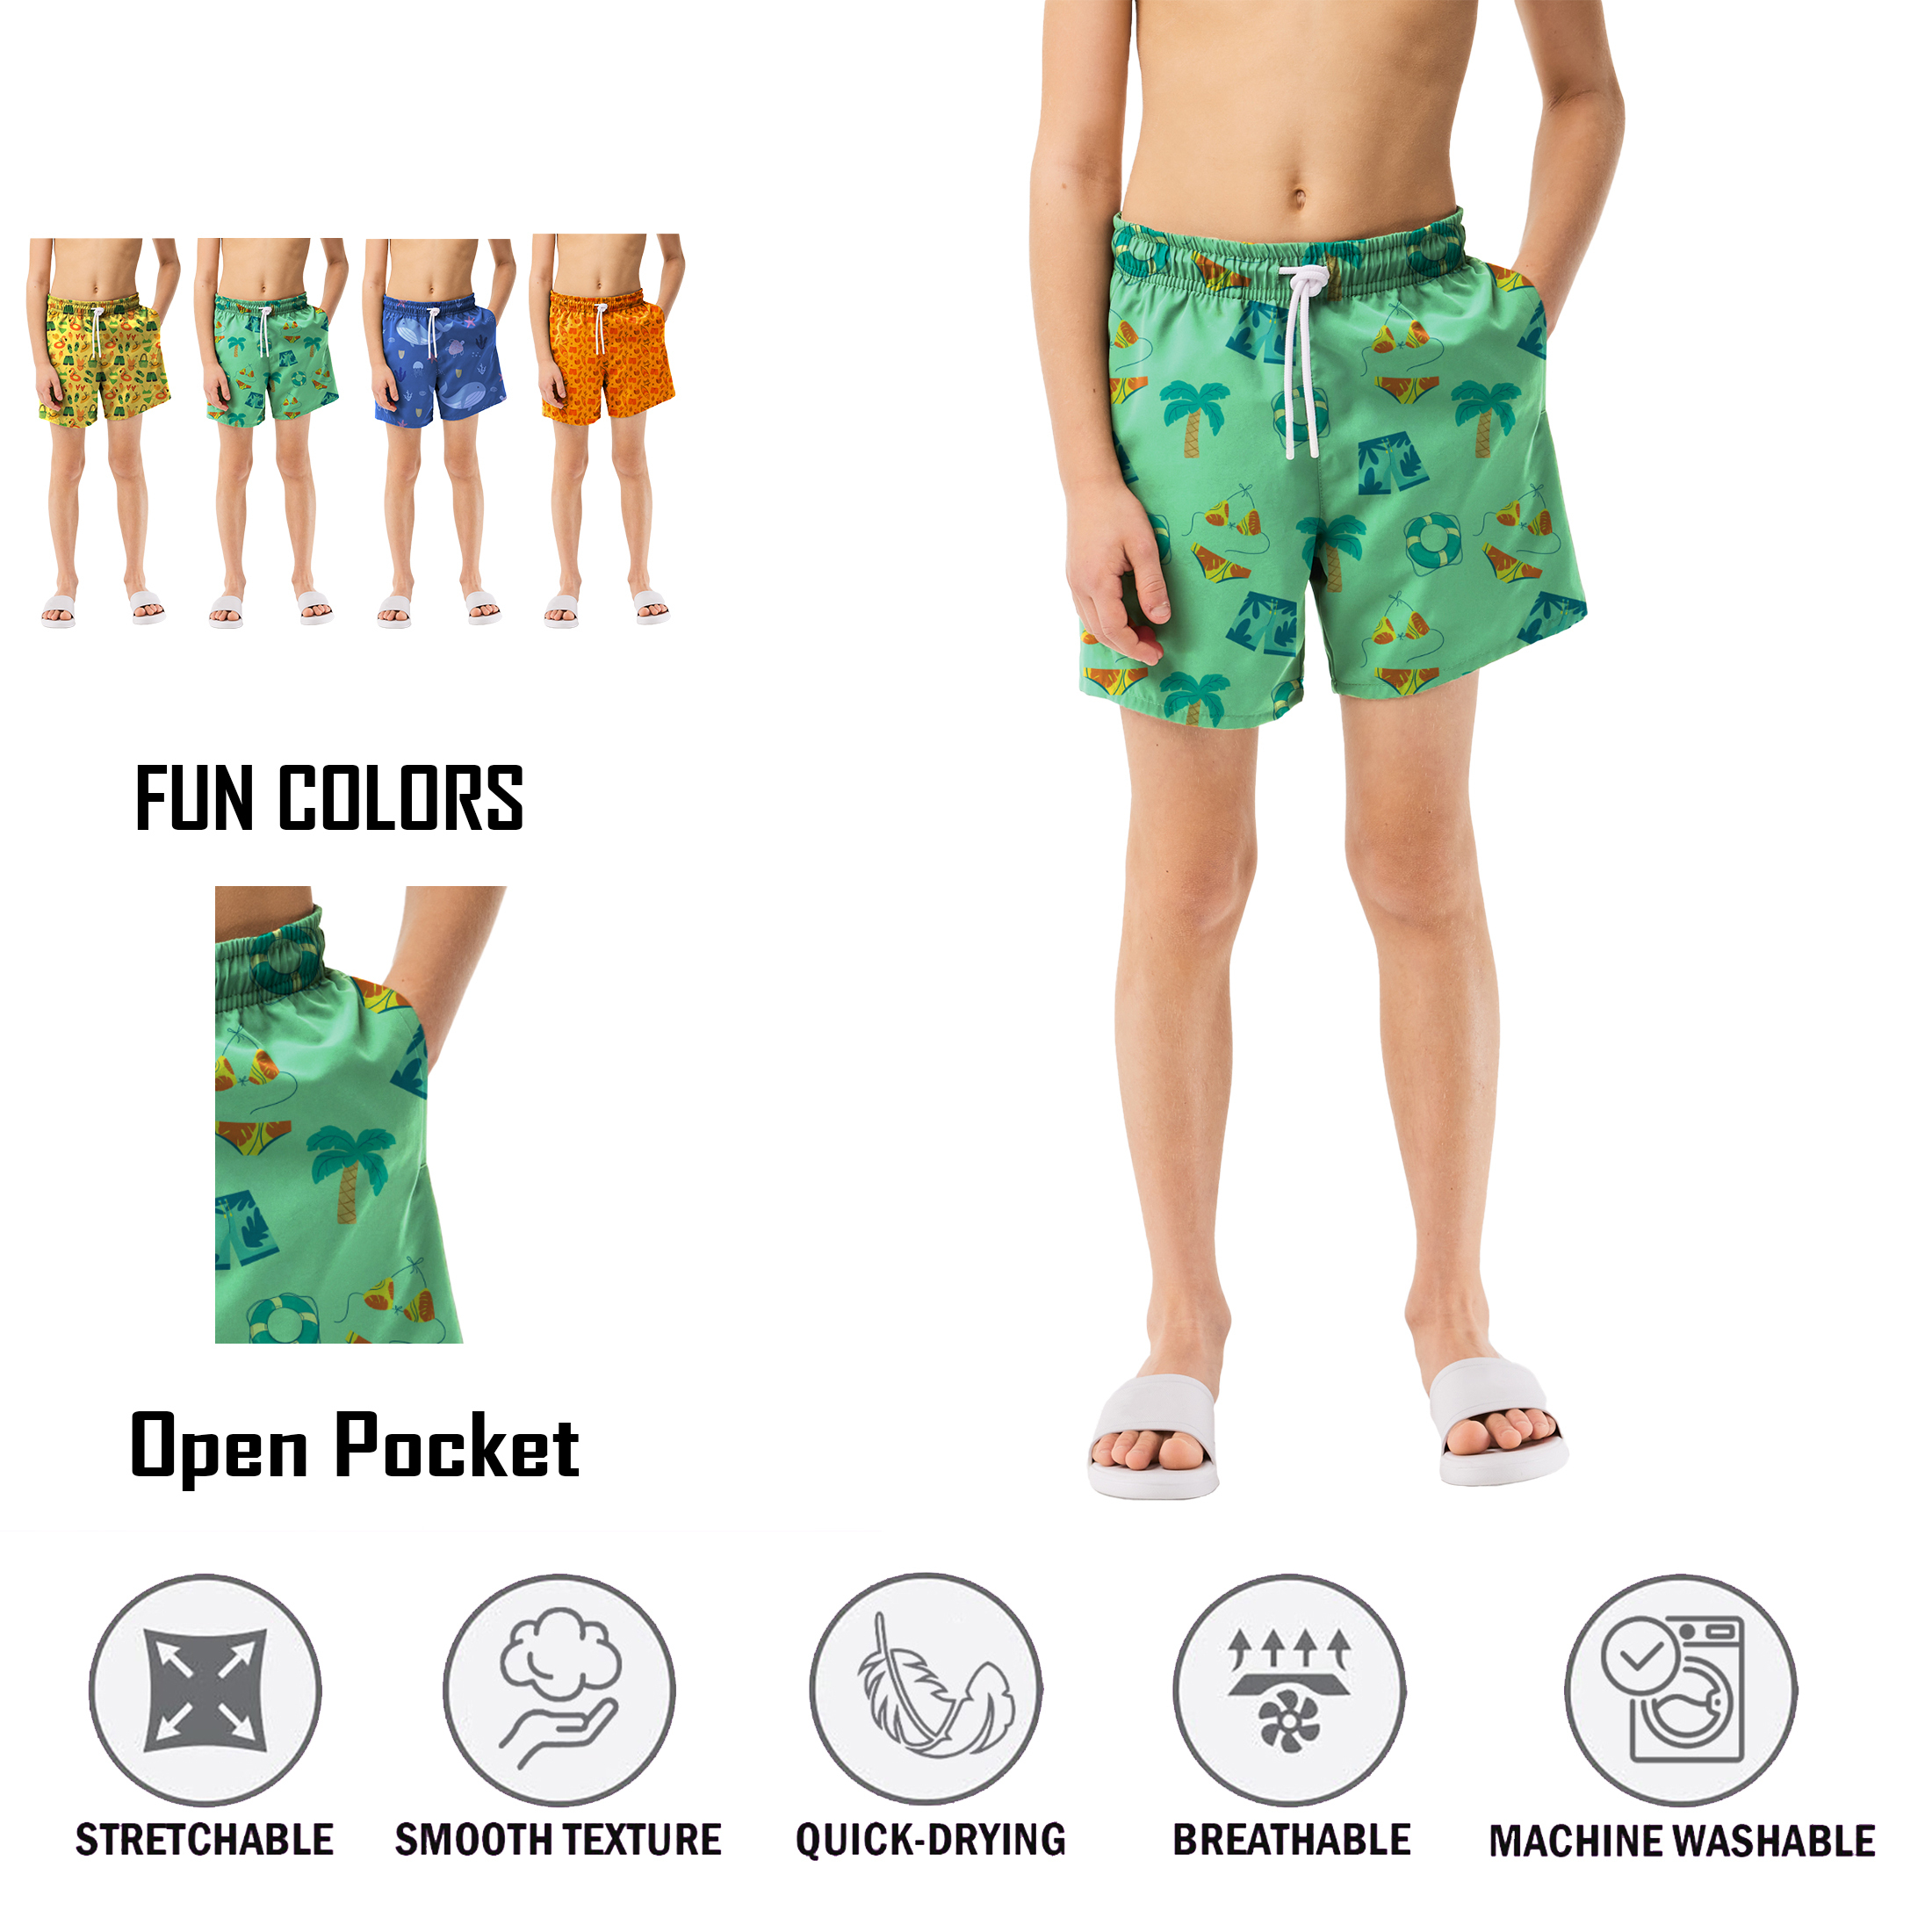 3-Pack: Boy's Quick-Dry Solid & Print Active Summer Beach Swimming Trunks Shorts - Print, Medium